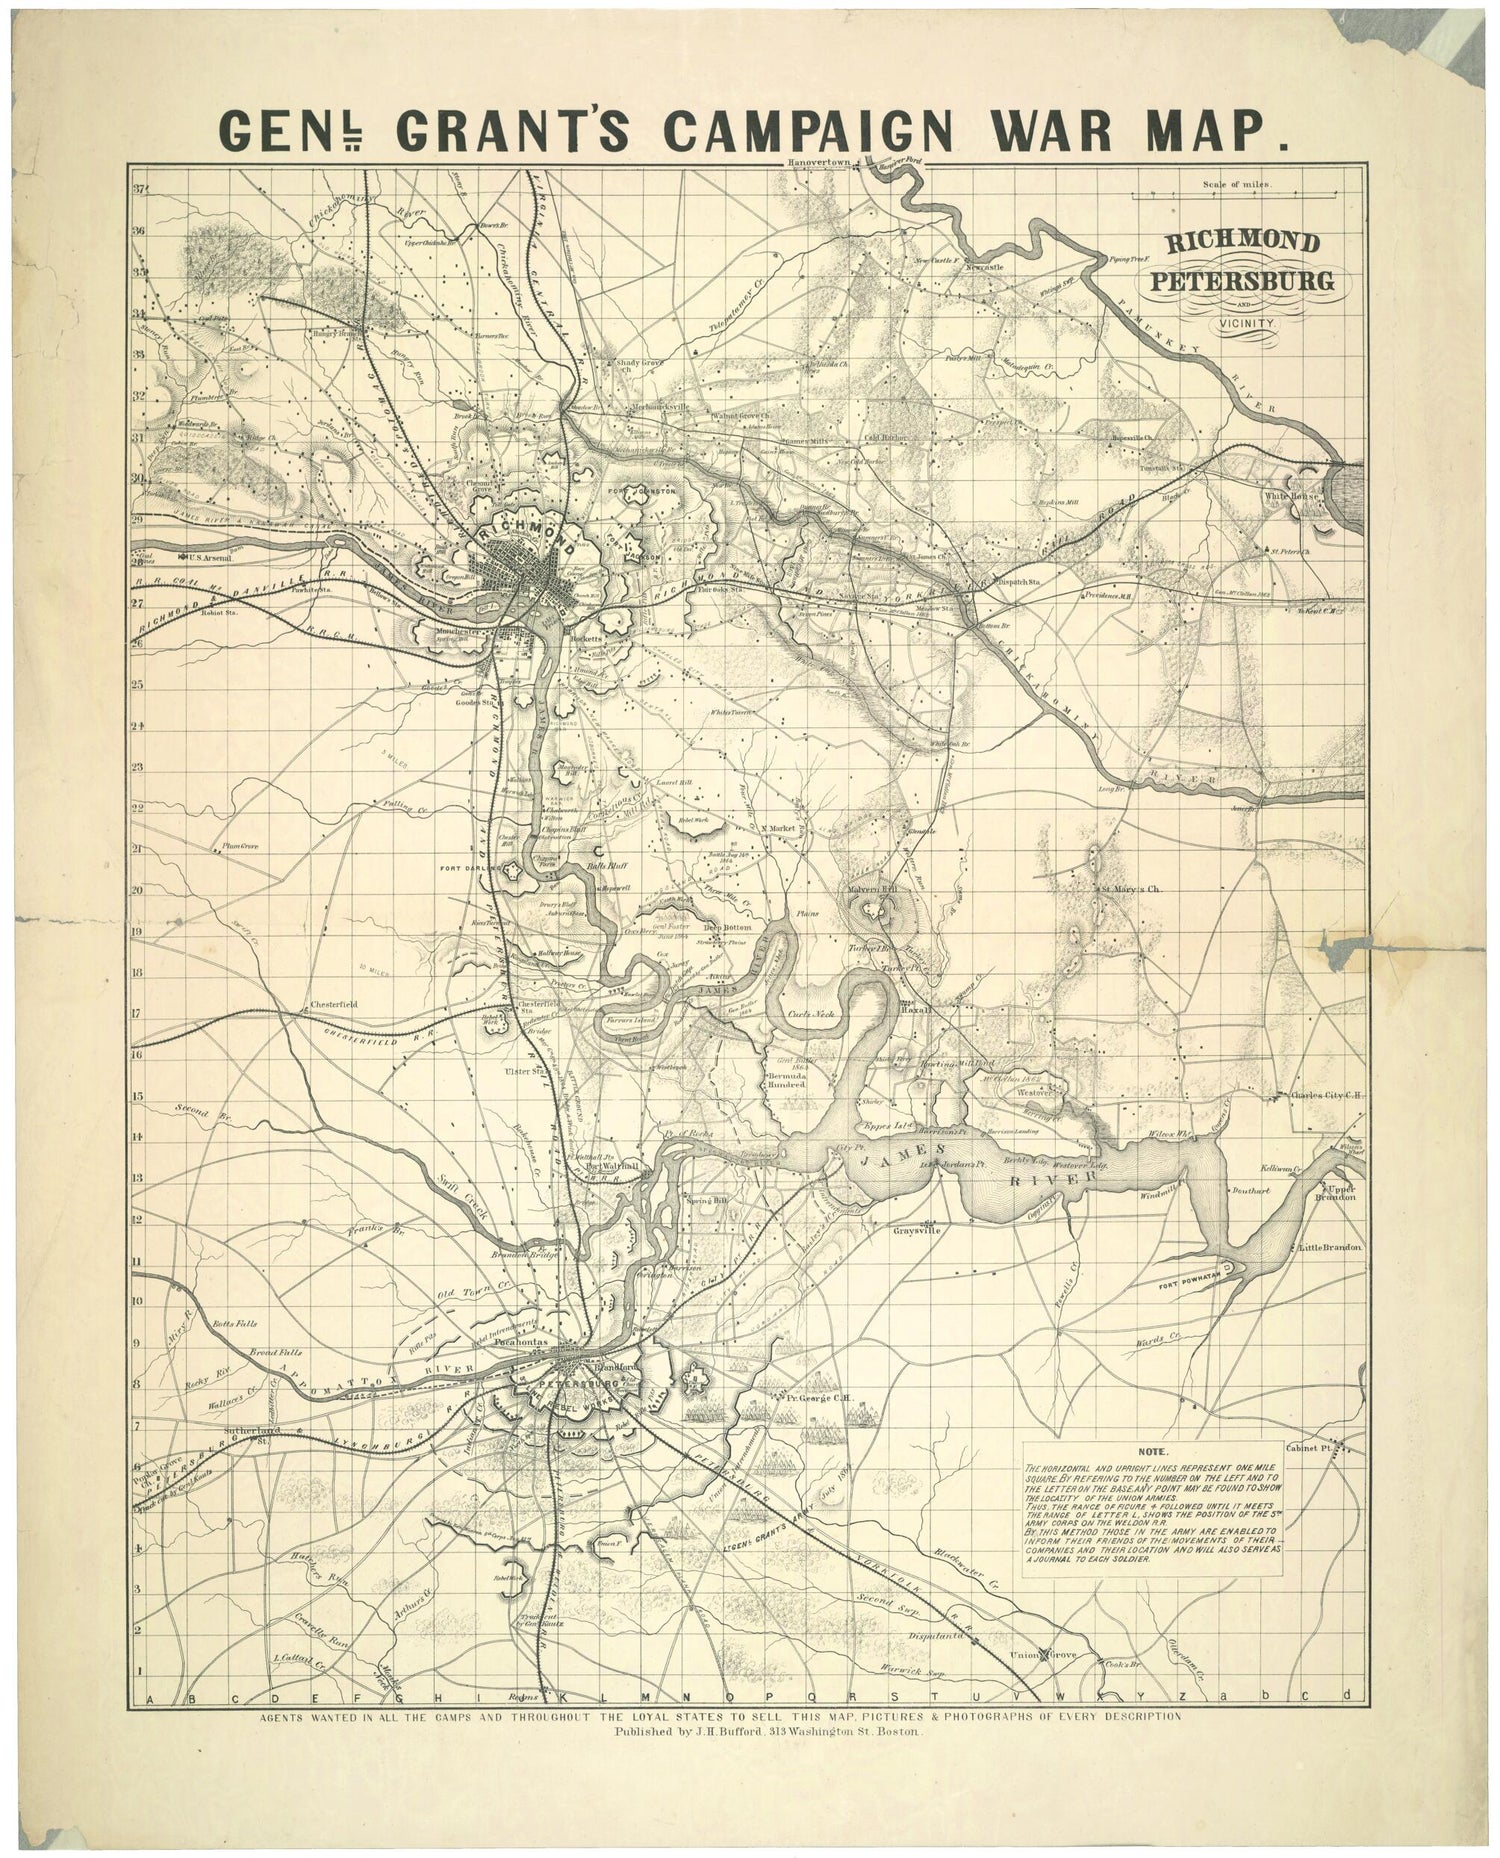 This old map of Richmond, Petersburg, and Vicinity Genl. Grant&